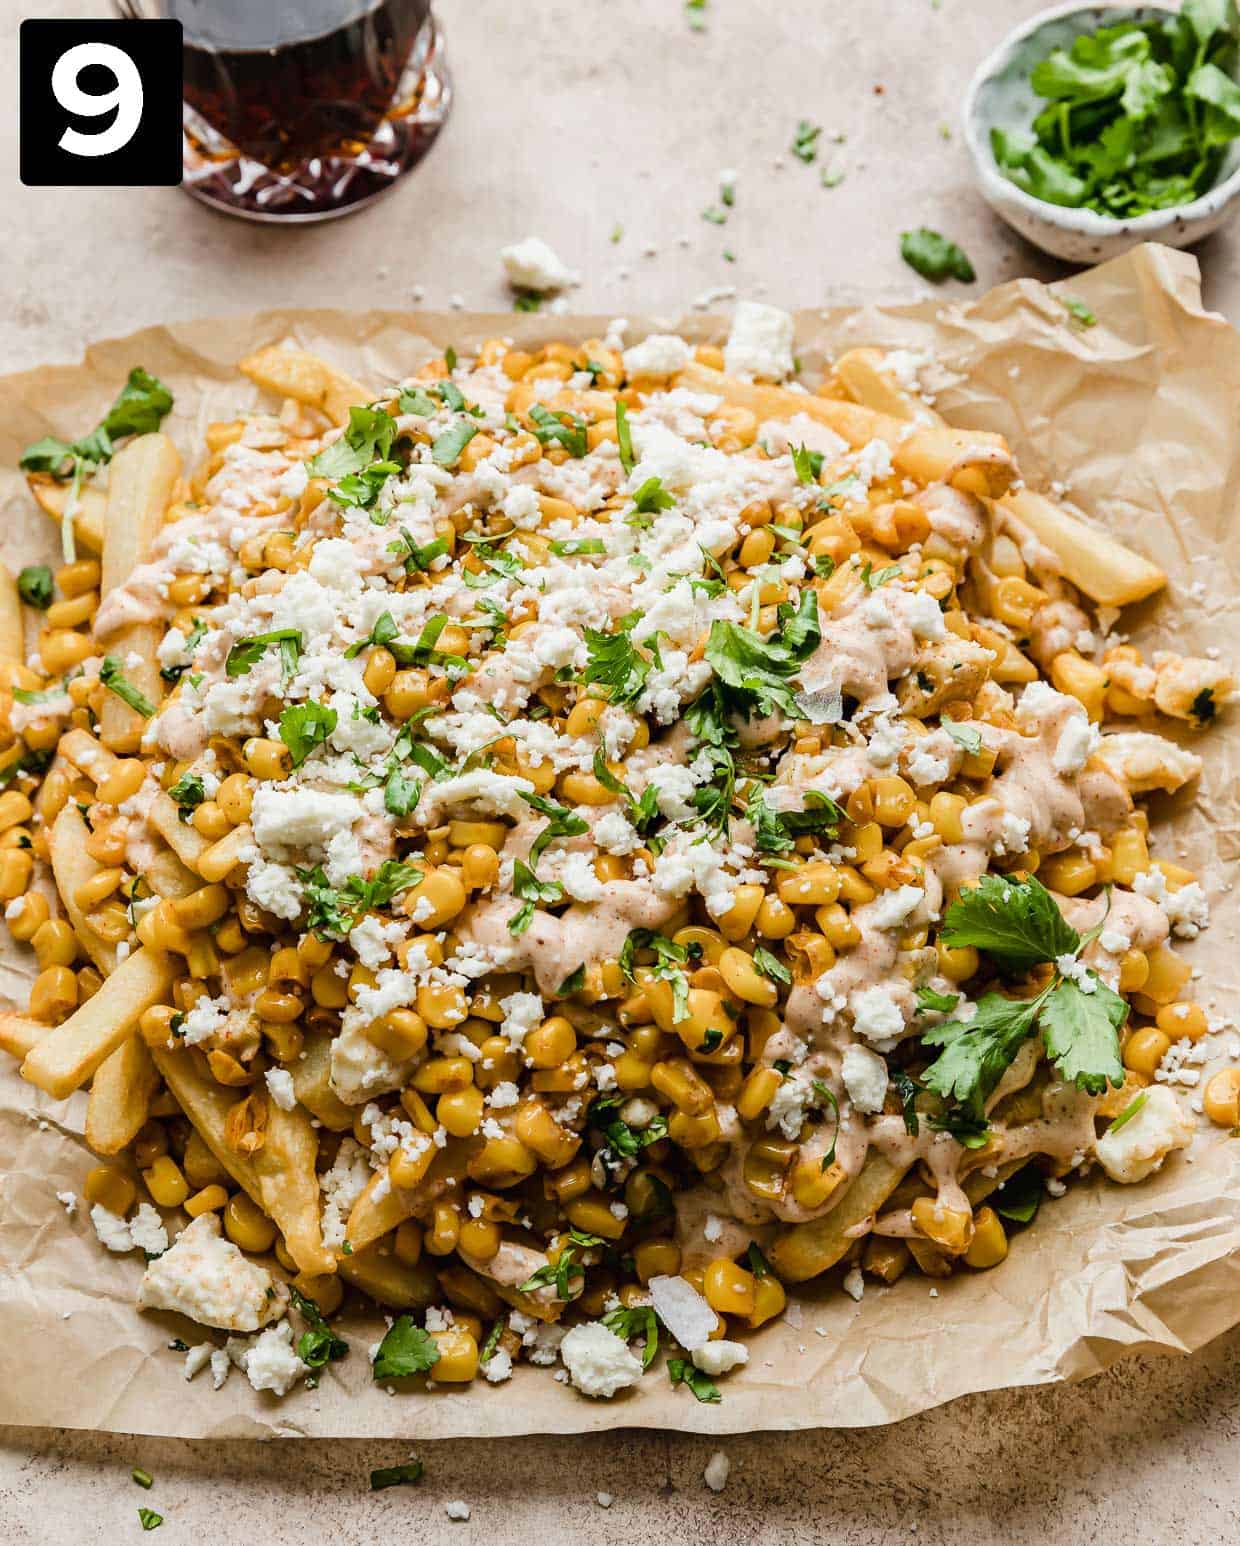 Corn Fries topped with a Mexican Street Corn Crema, cilantro, and cheese.